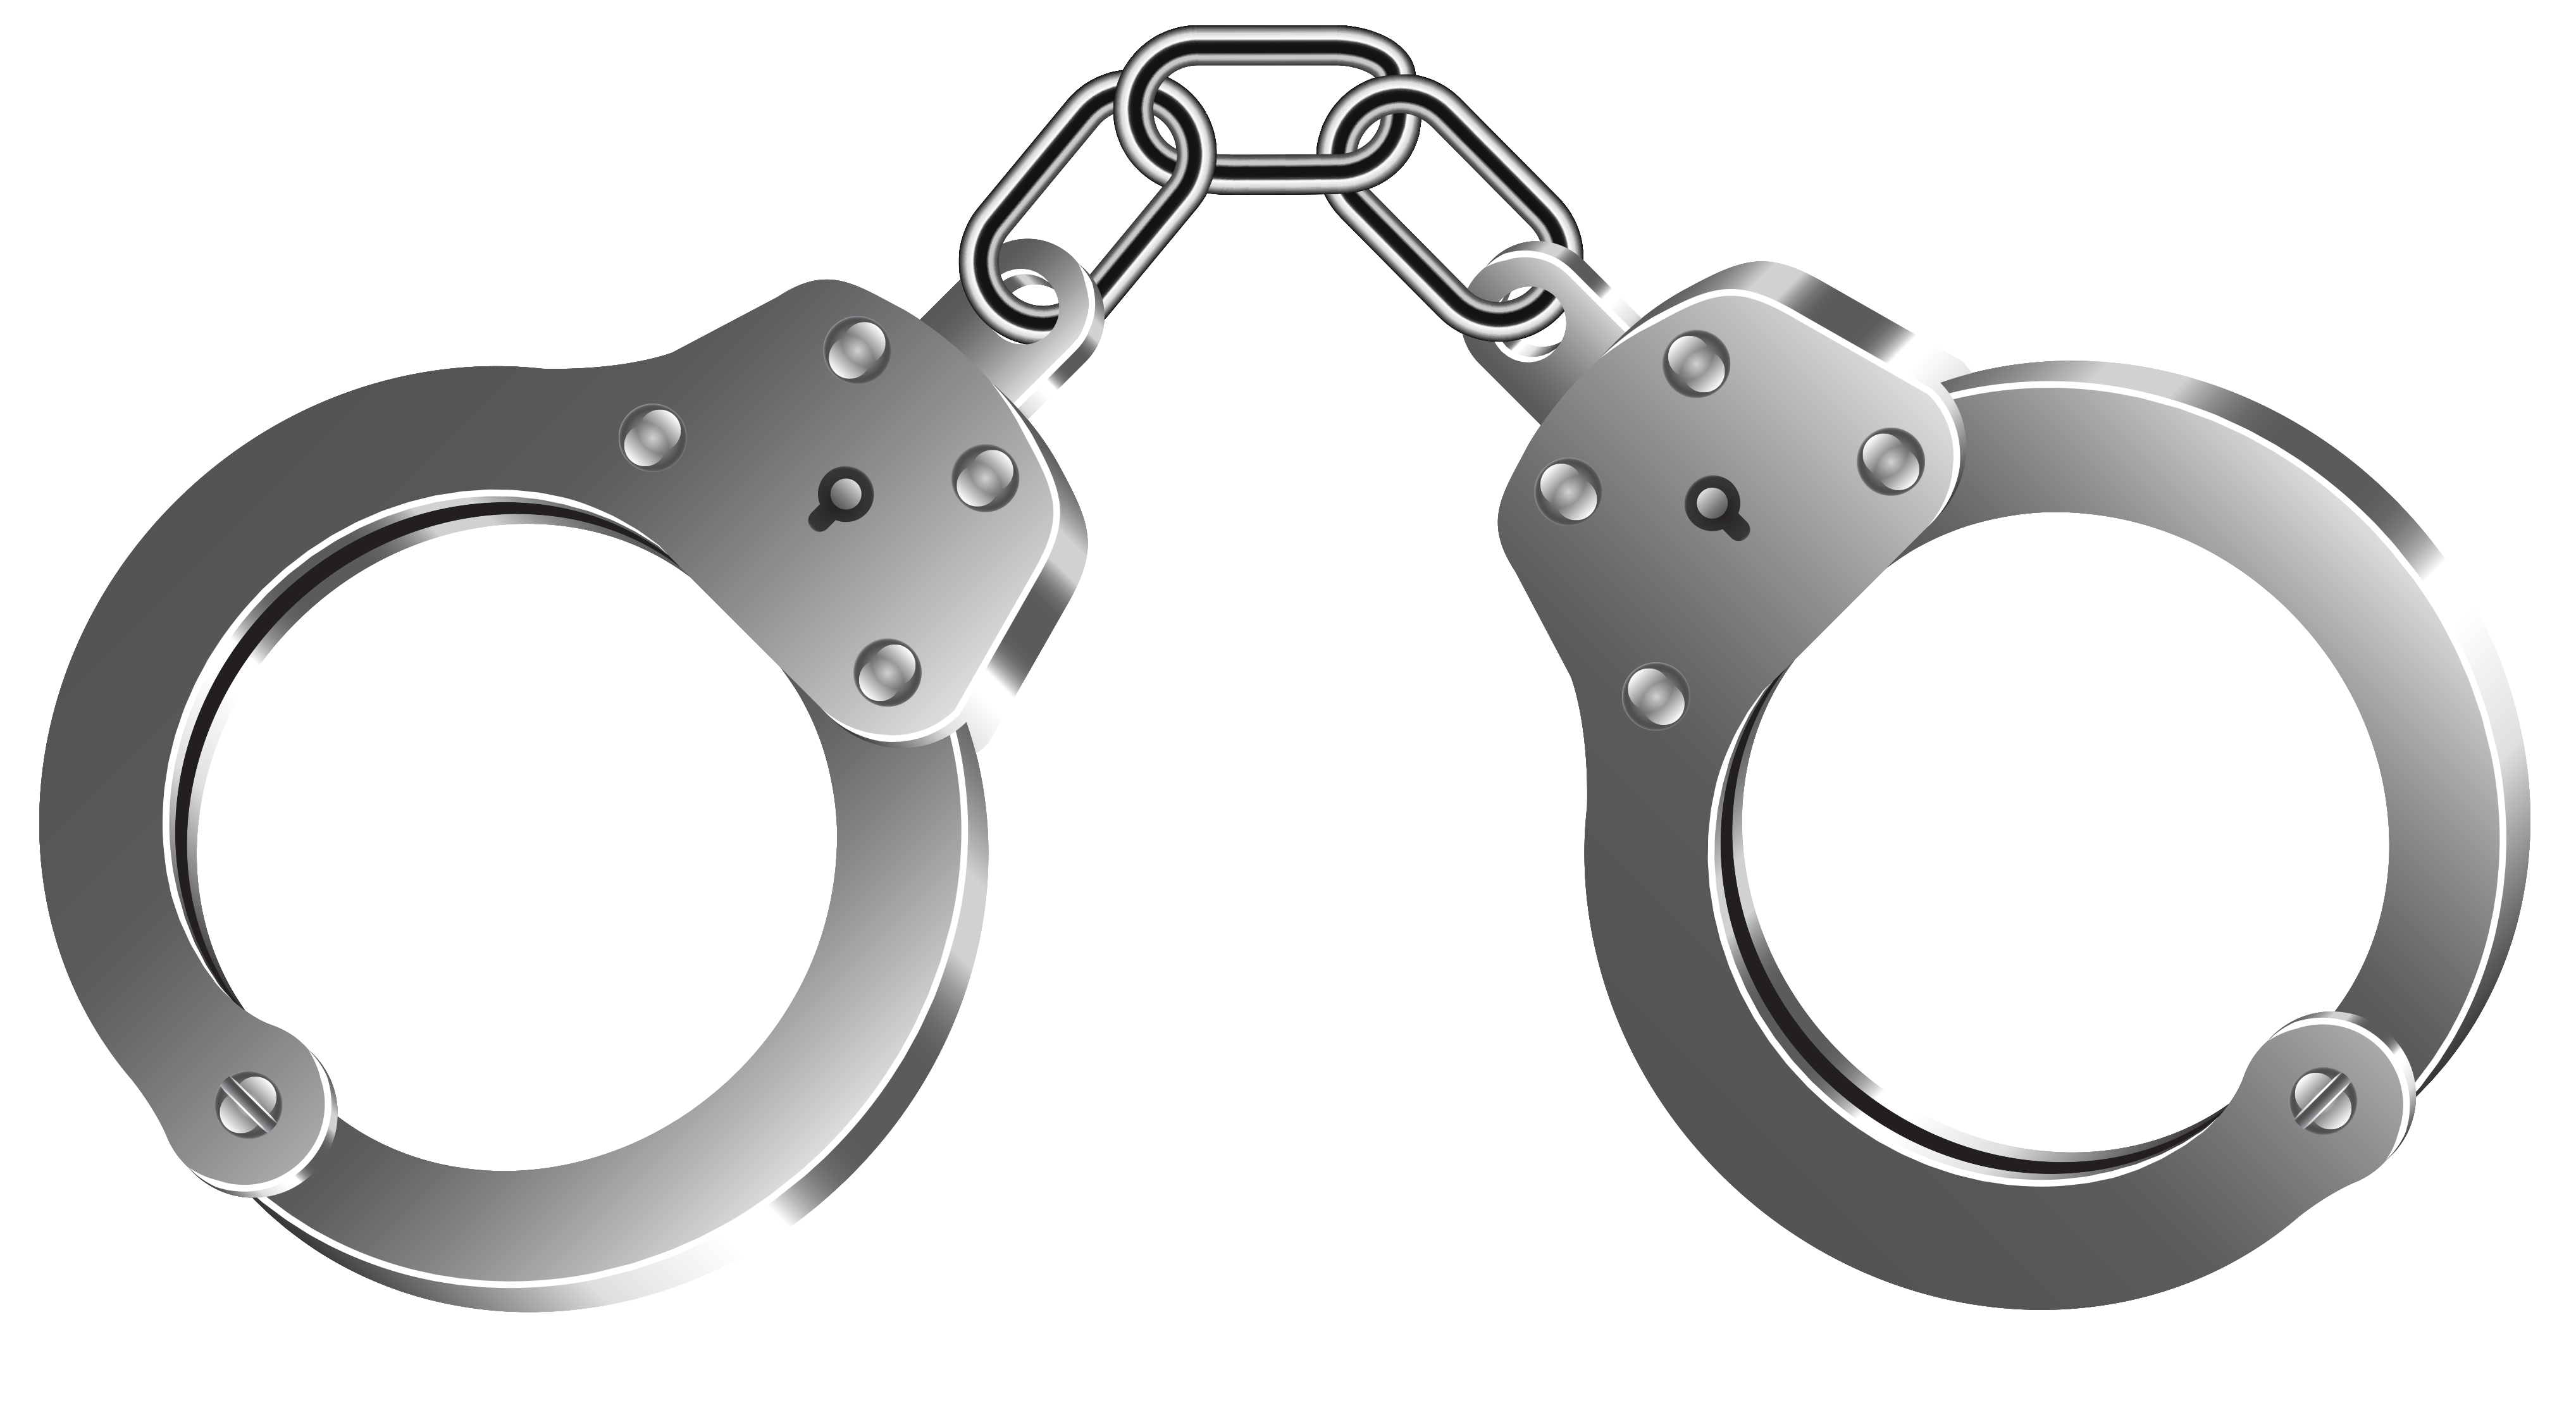 Amazing of letters format. Handcuffs clipart tool